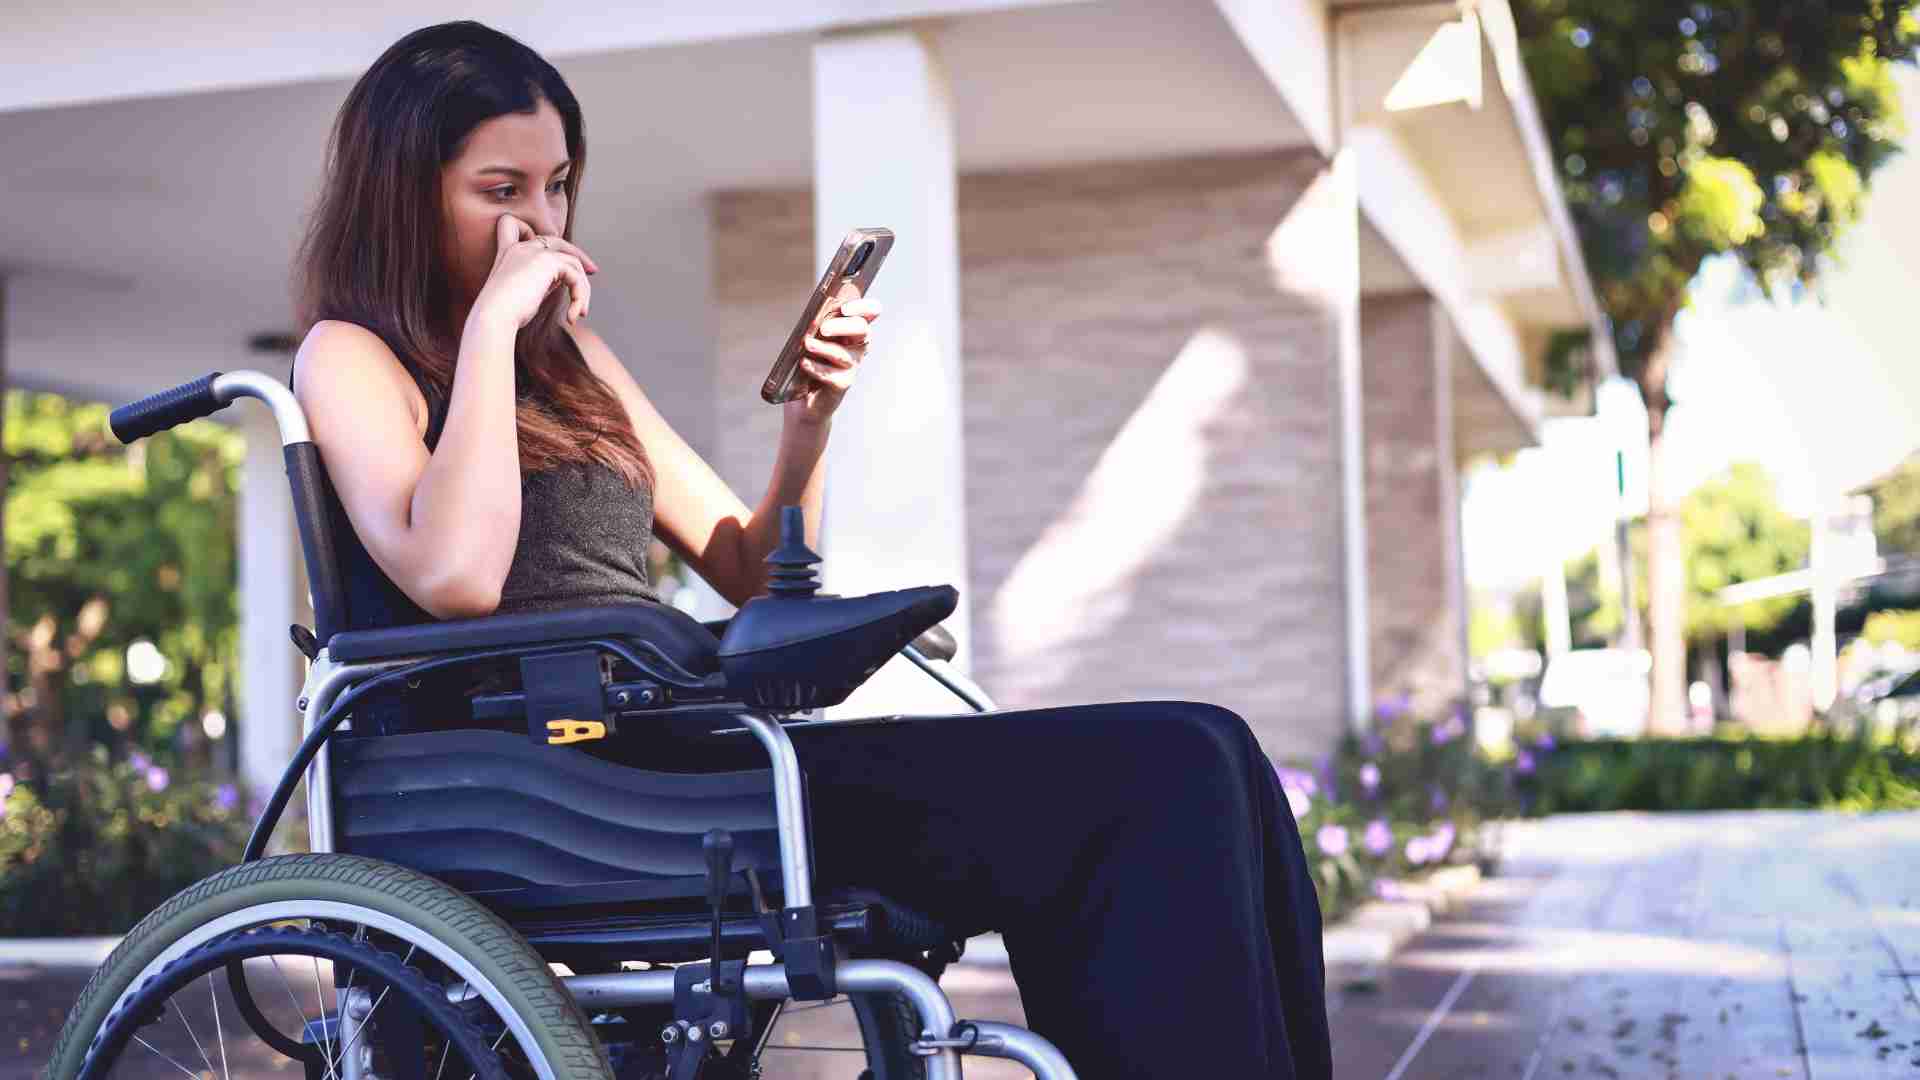 SSDI beneficiaries to get 1,537 in 24 hours, check disability benefit